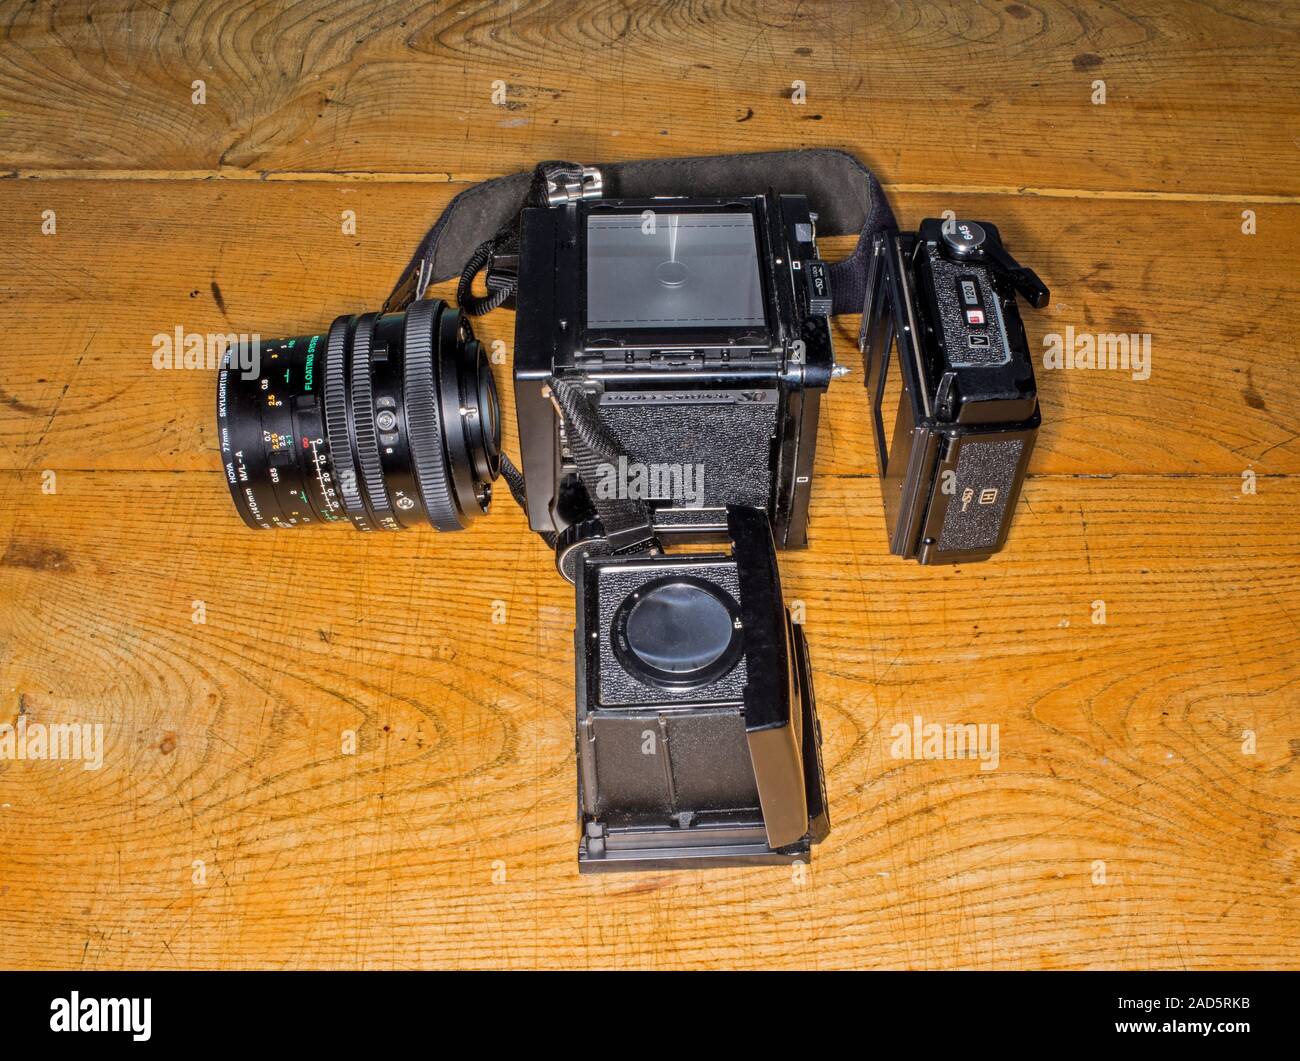 Medium format cameras have various compnats that can be changed such as film baccks and view fiders. Stock Photo